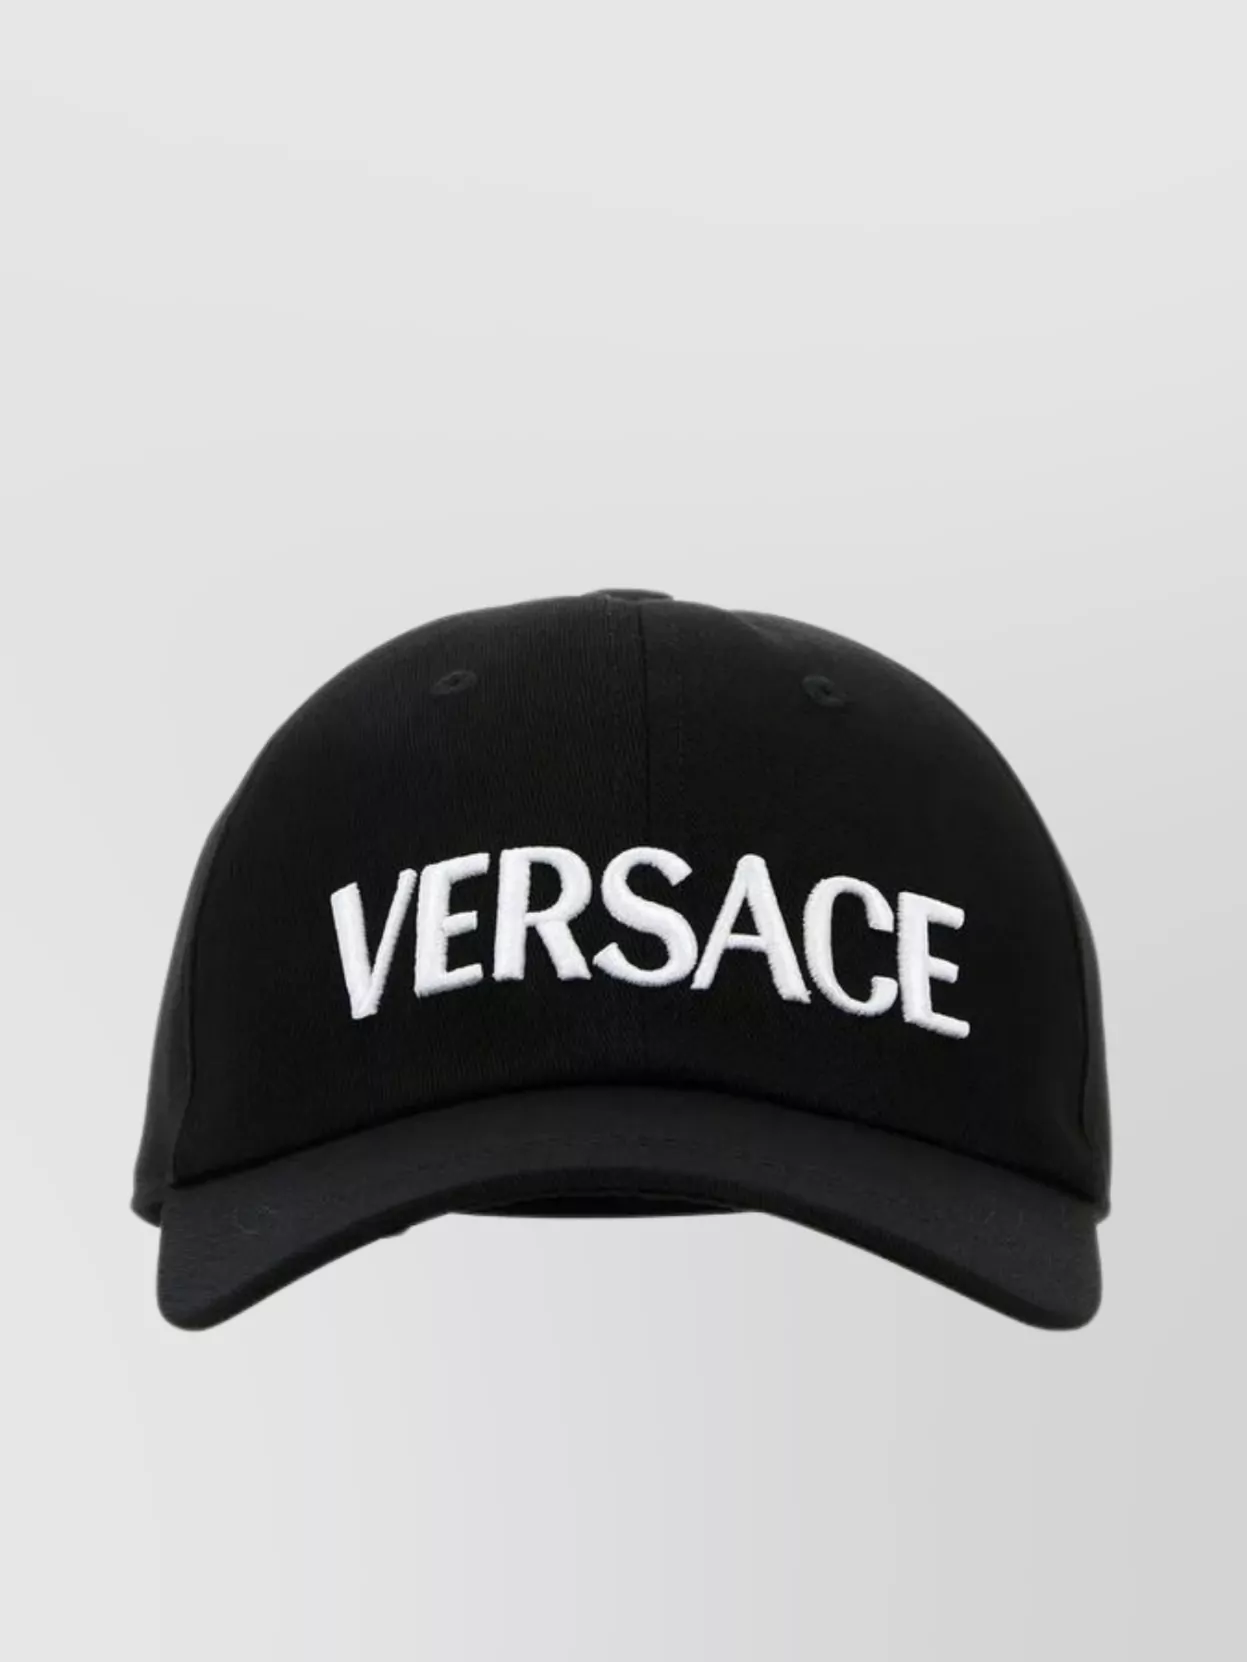 Shop Versace Baseball Cap With Curved Visor And Ventilation Holes